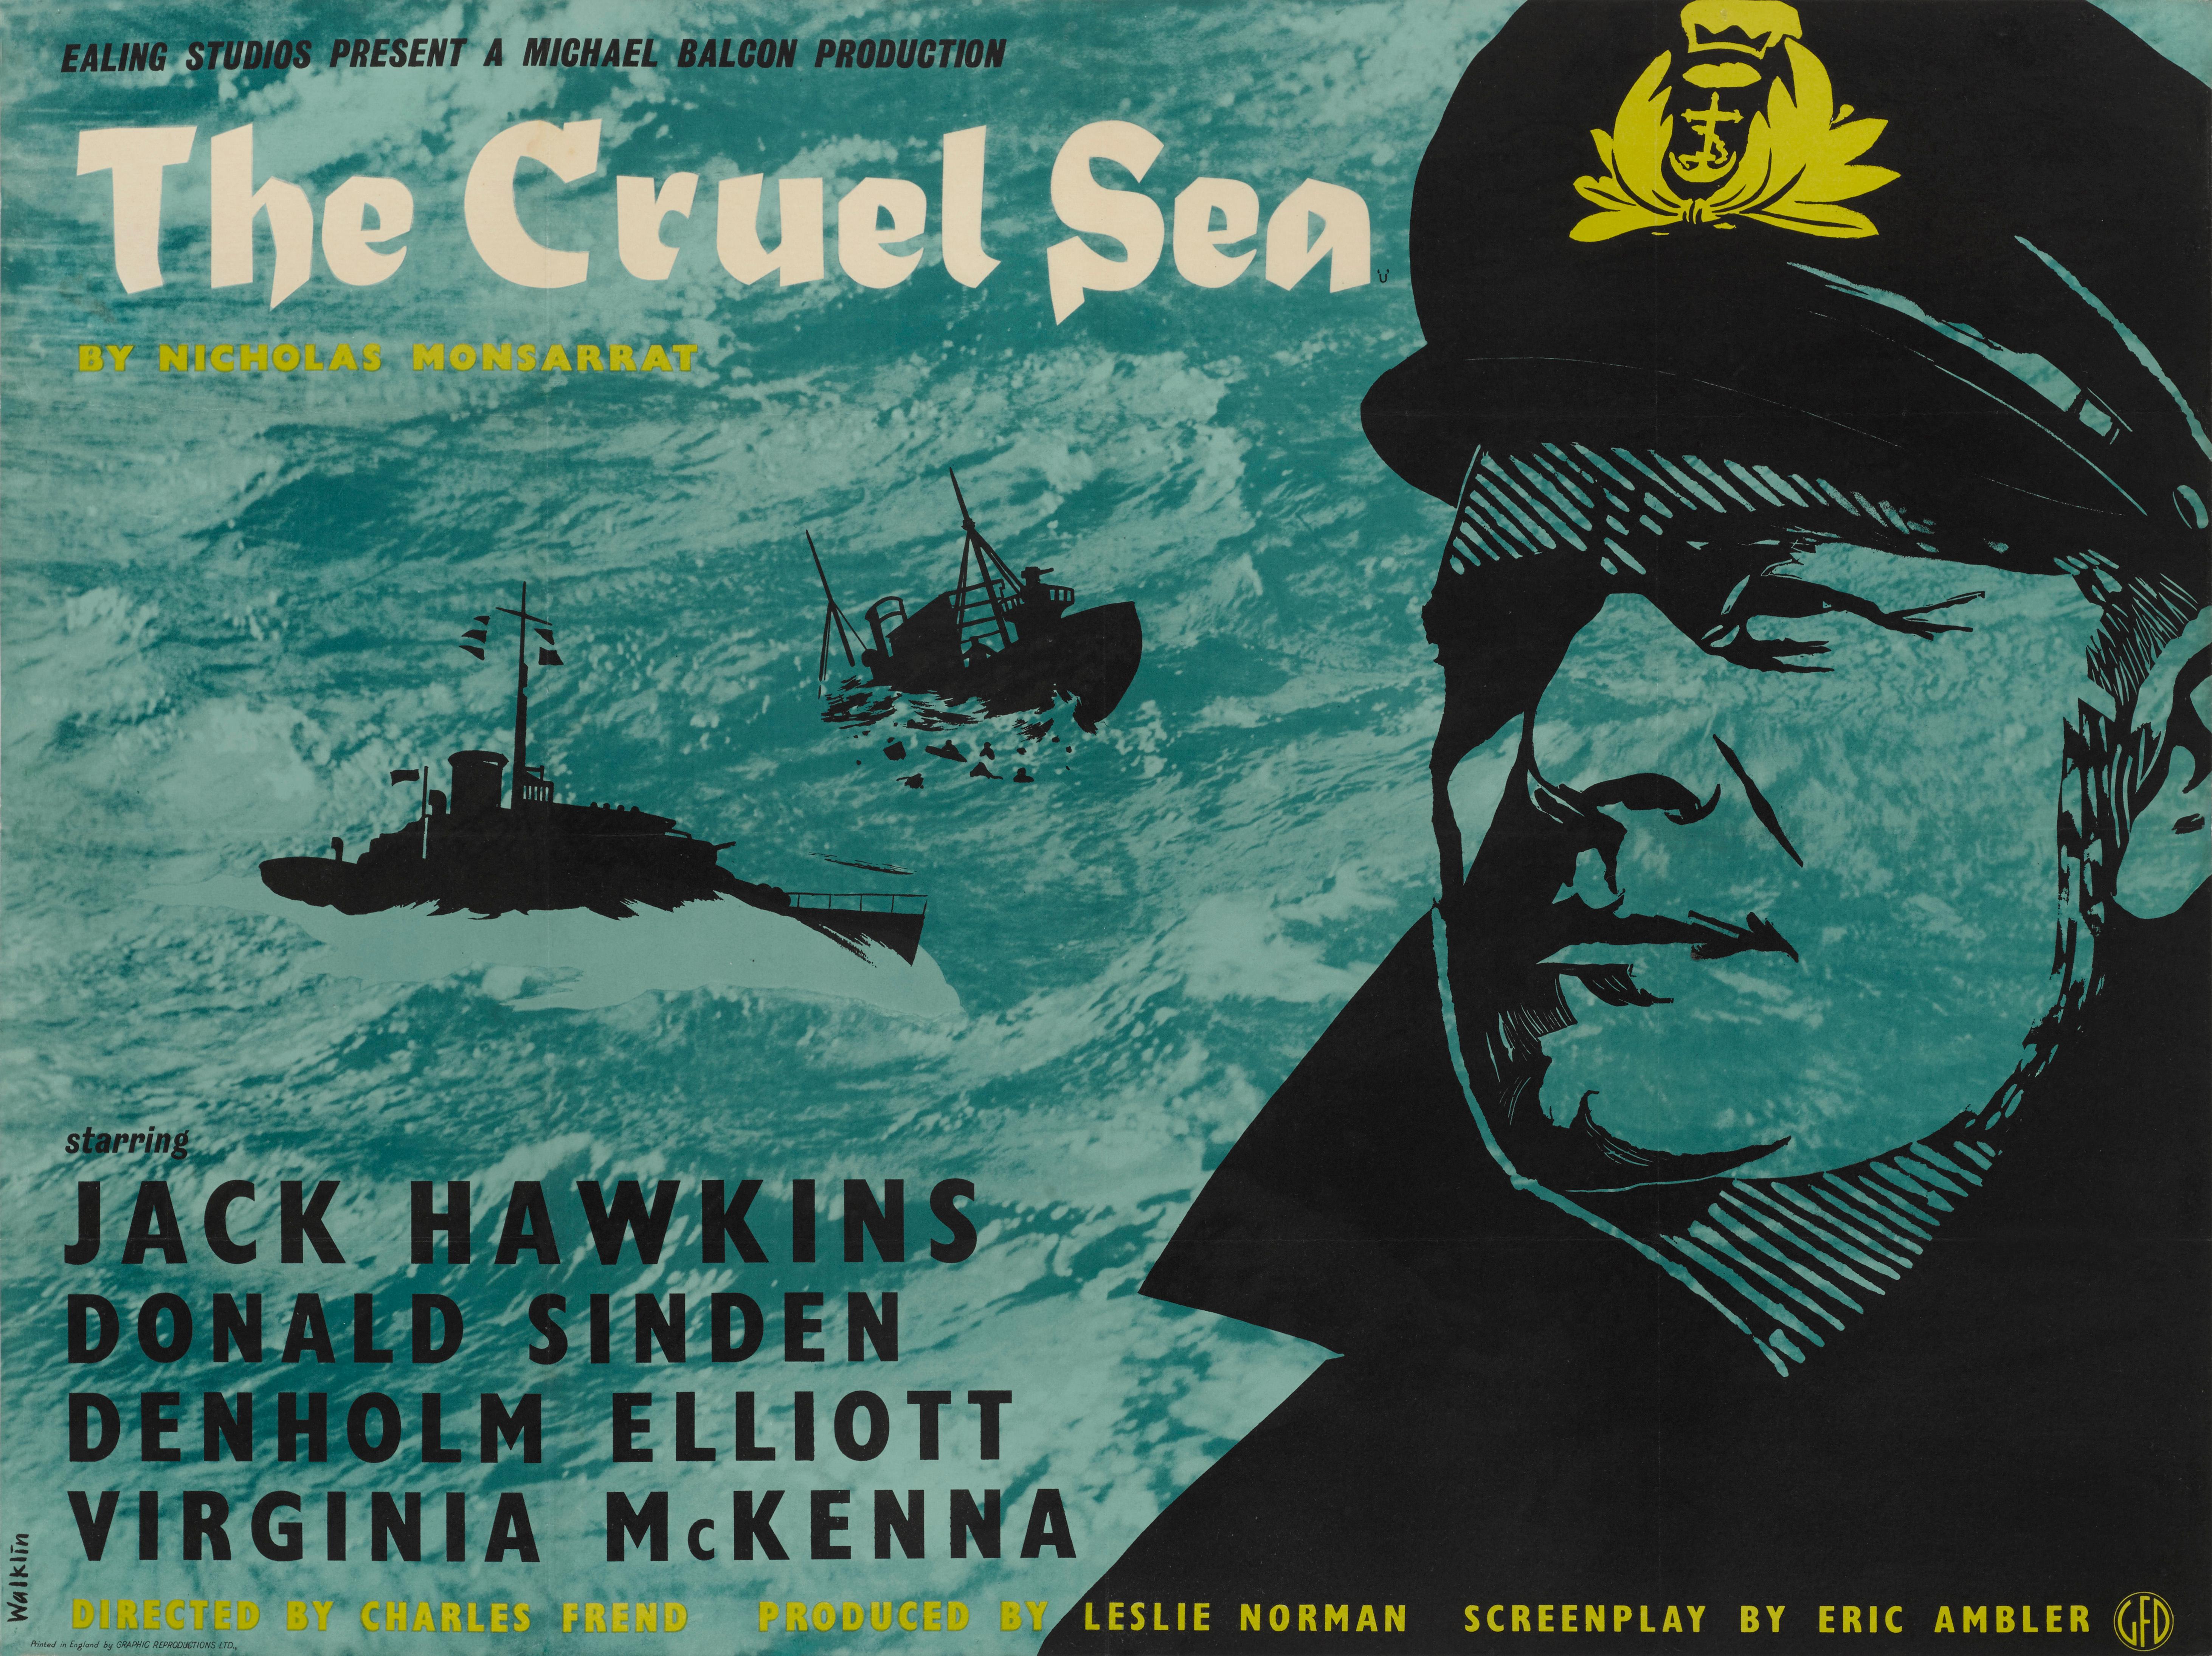 Original 1953 British film poster for The Cruel Sea.
This film was directed by Charles Frend and starred Jack Hawkins, Donald Sinden, this war film was set At the start of World War II. This poster is conservation linen backed and would be shipped